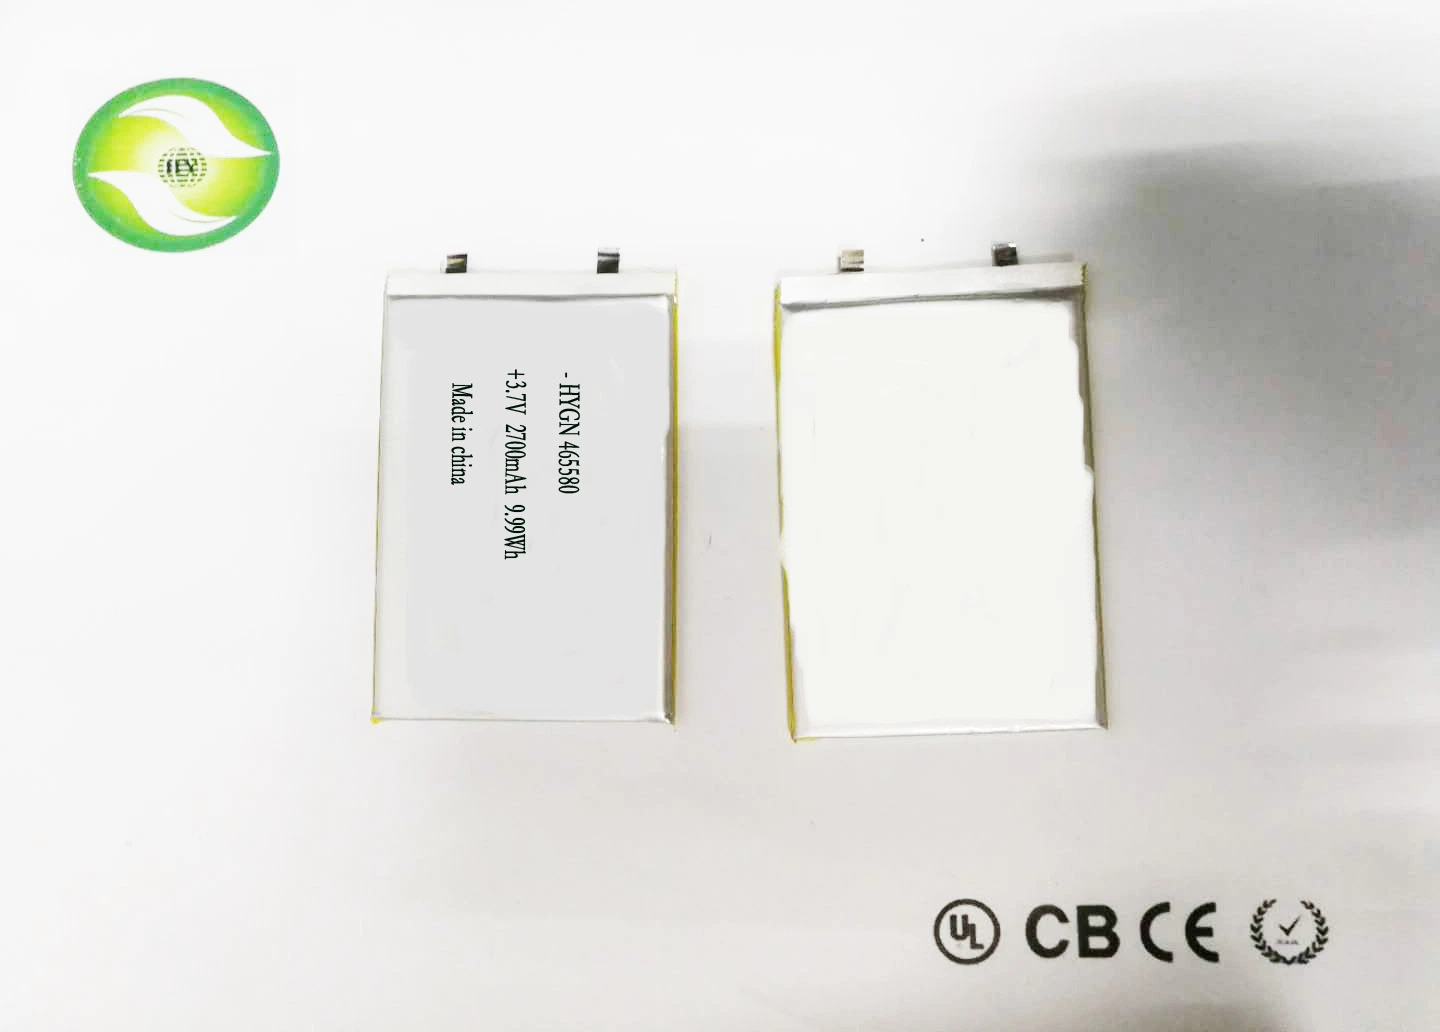 High Quality 3.7V Li-ion Polymer Battery Rechargeable Battery 465580 -2700 mAh for POS Machine